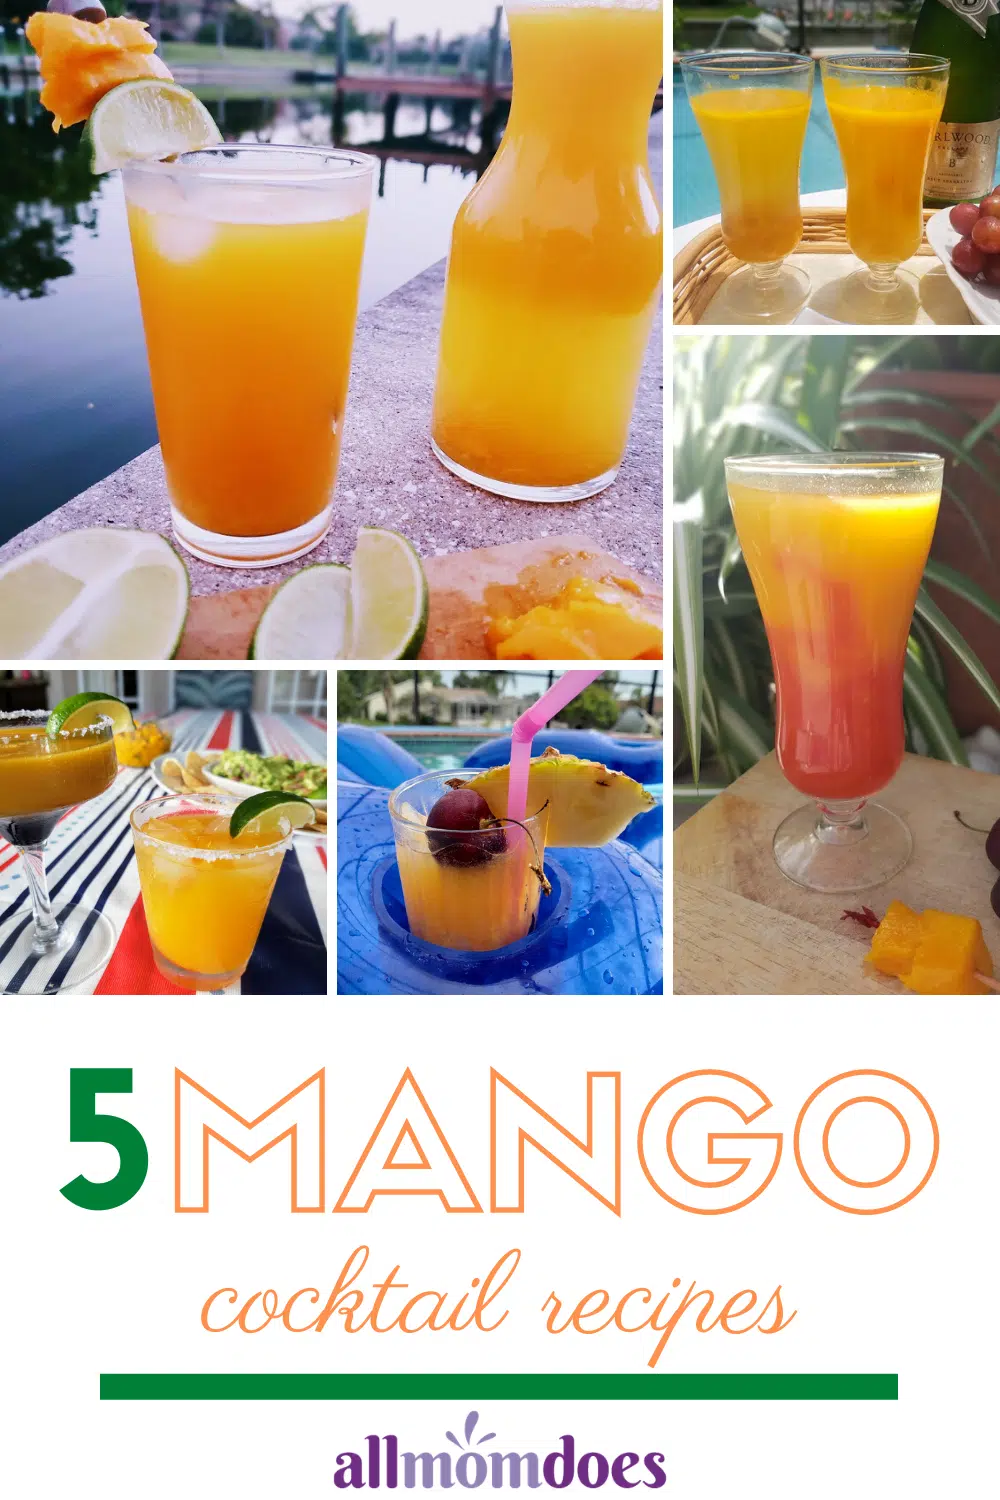 Mango Cocktail Recipe Ideas - refreshing cocktails and mocktails for summer!